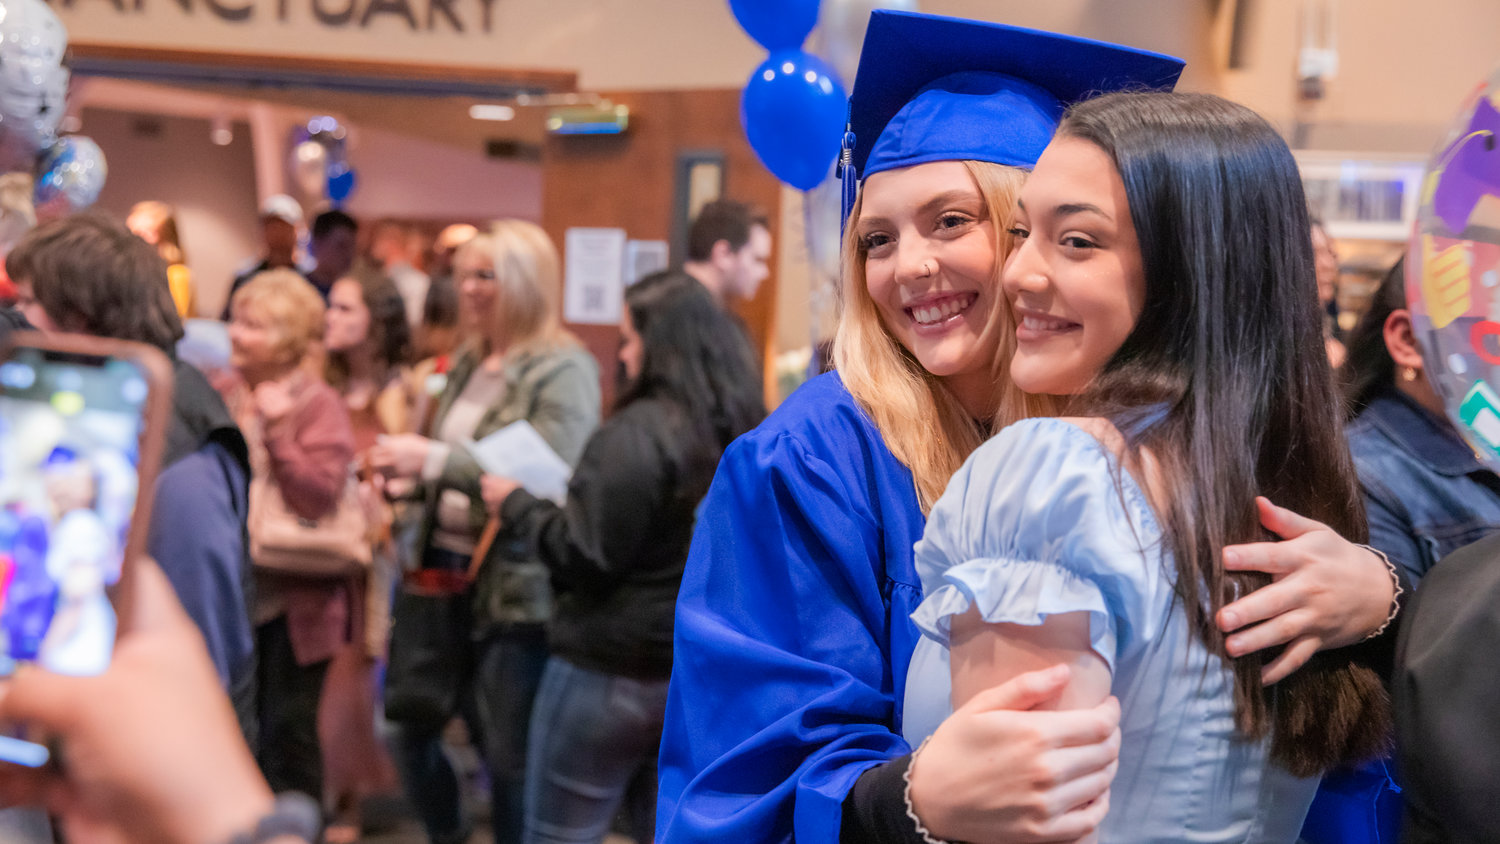 Presley Town smiles as she receives an embrace following a graduation ceremony for Futurus High School in Centralia Tuesday evening.